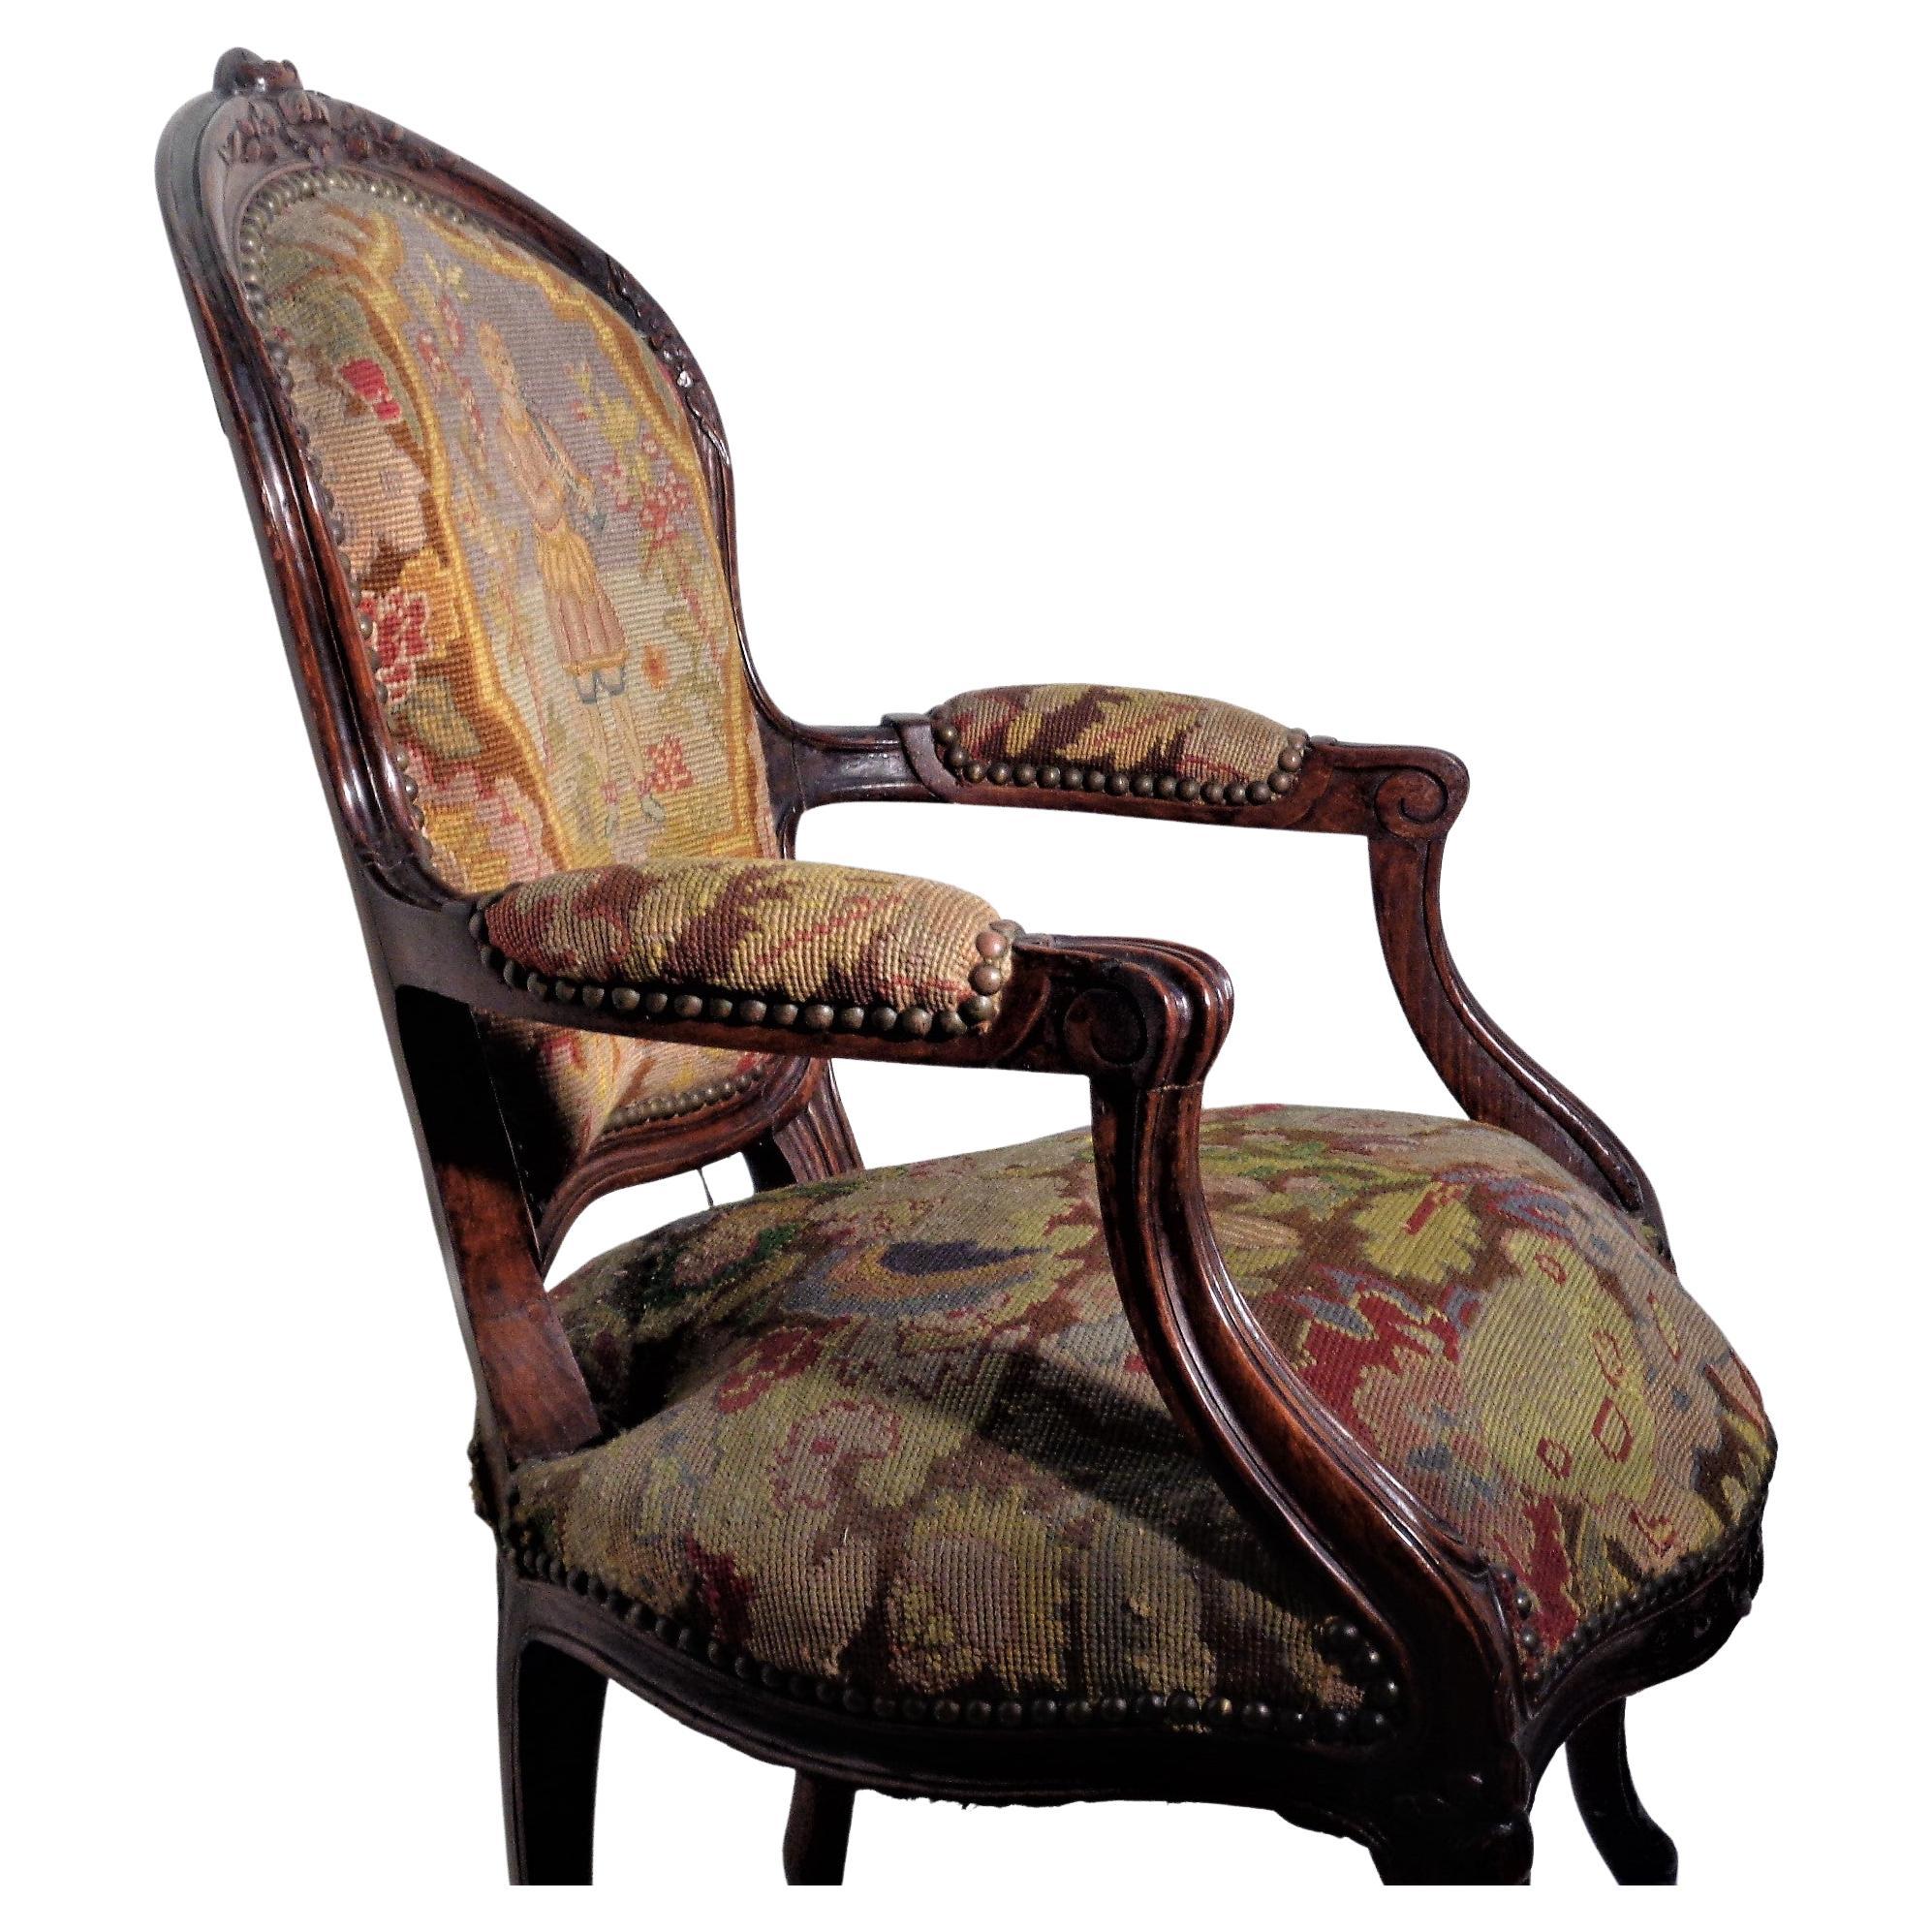 19th Century Louis XV Style Carved Beech Wood Fauteuil Grospoint Tapestry For Sale 3